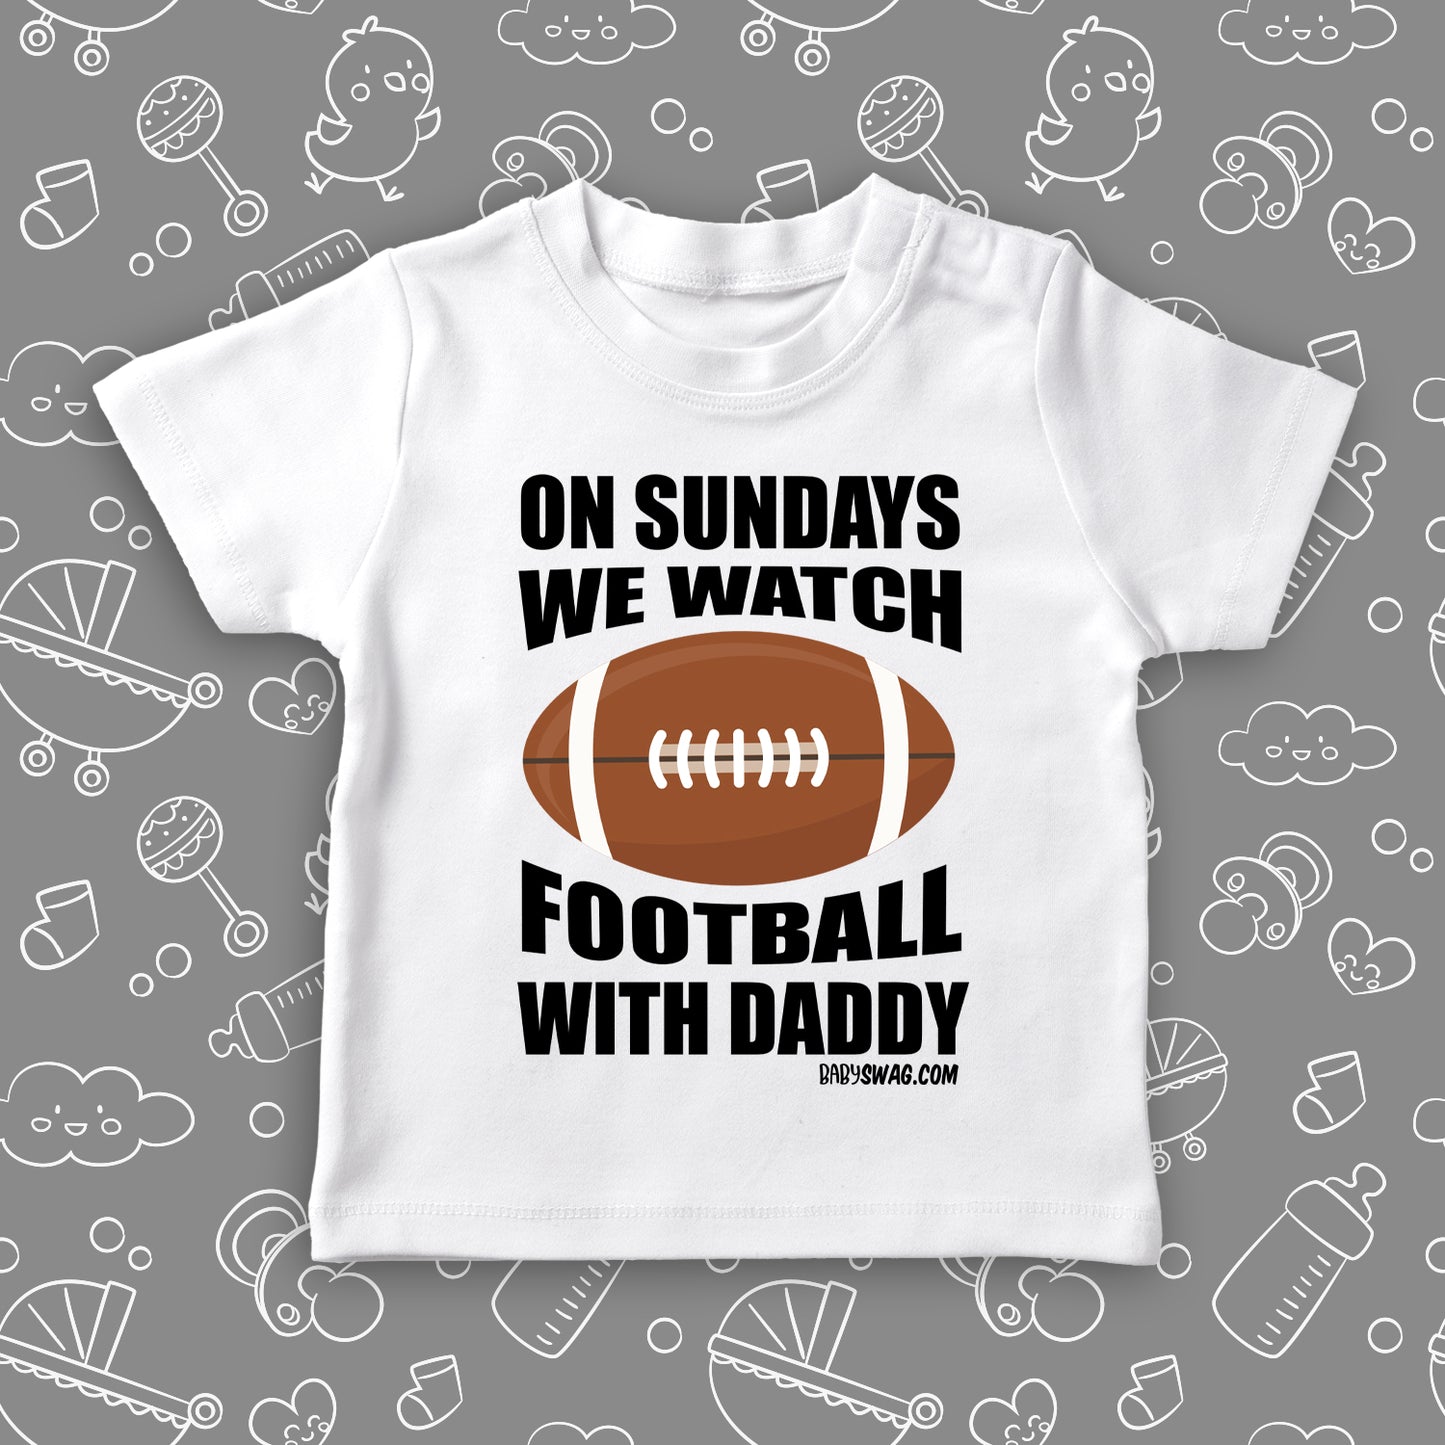 The "On Sunday We Watch Football With Daddy" toddler boy shirt in white